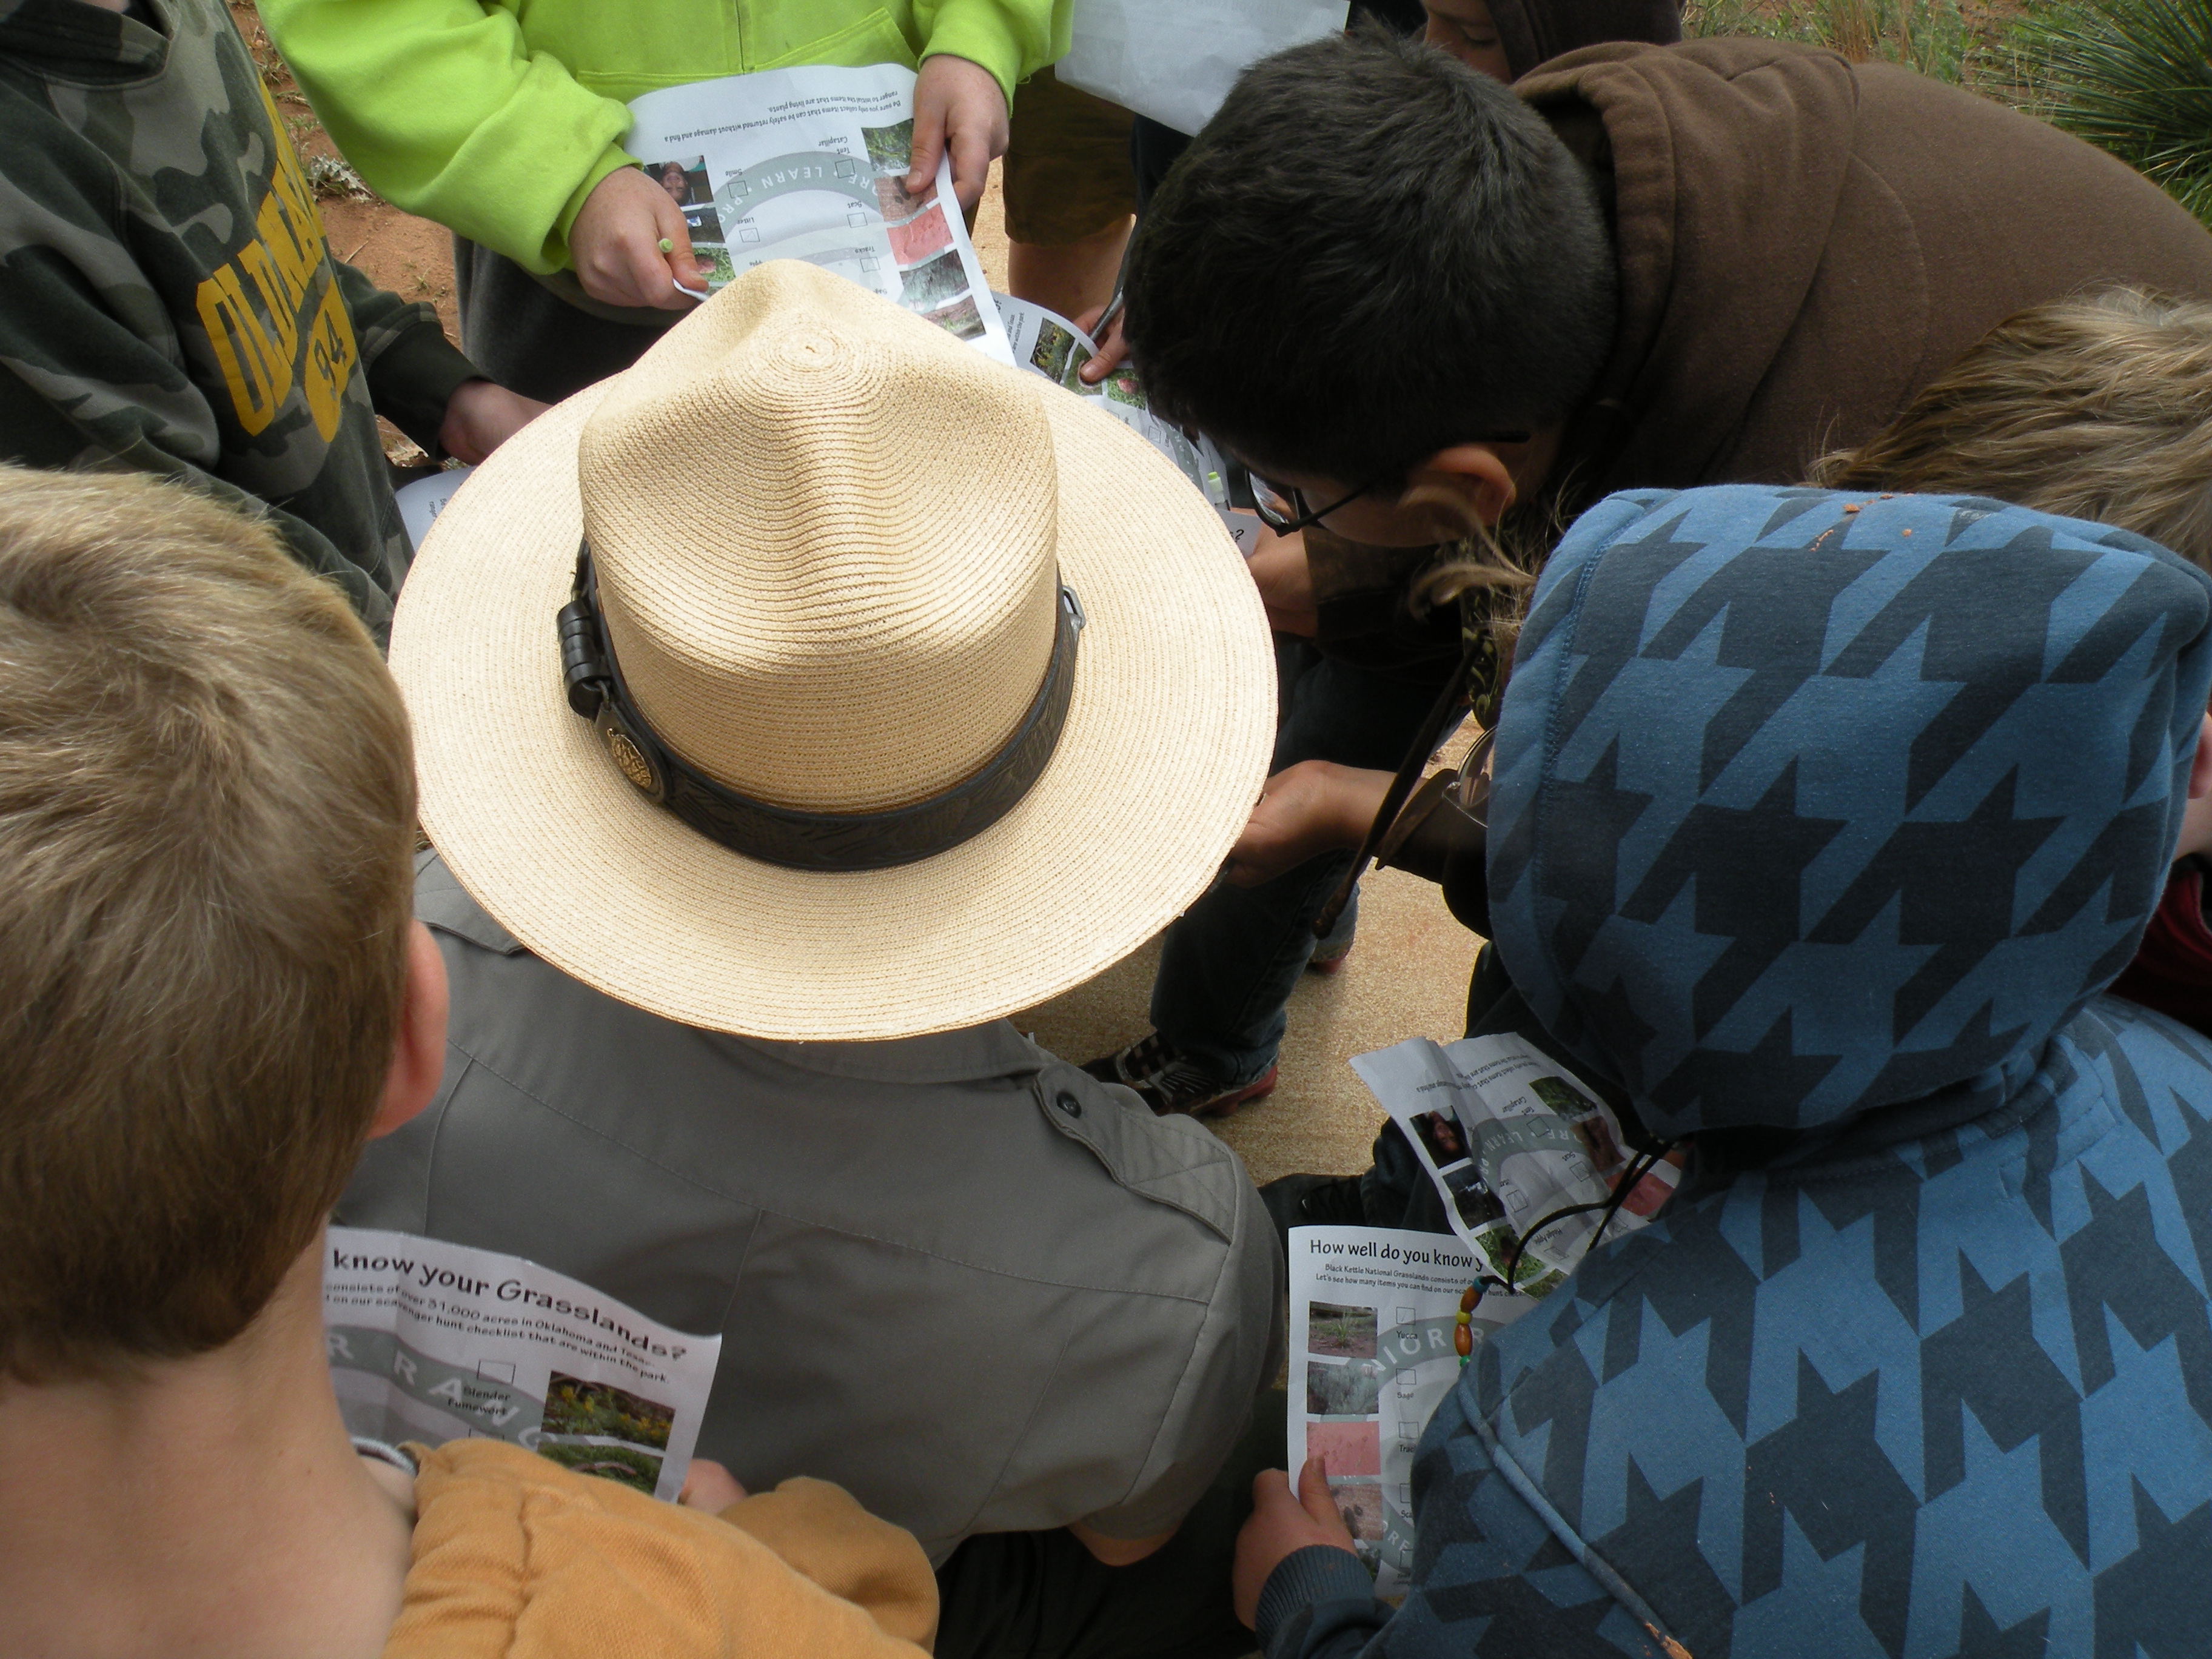 A Park Ranger knells down among Junior Rangers so only his hat shows within the crowd of children.